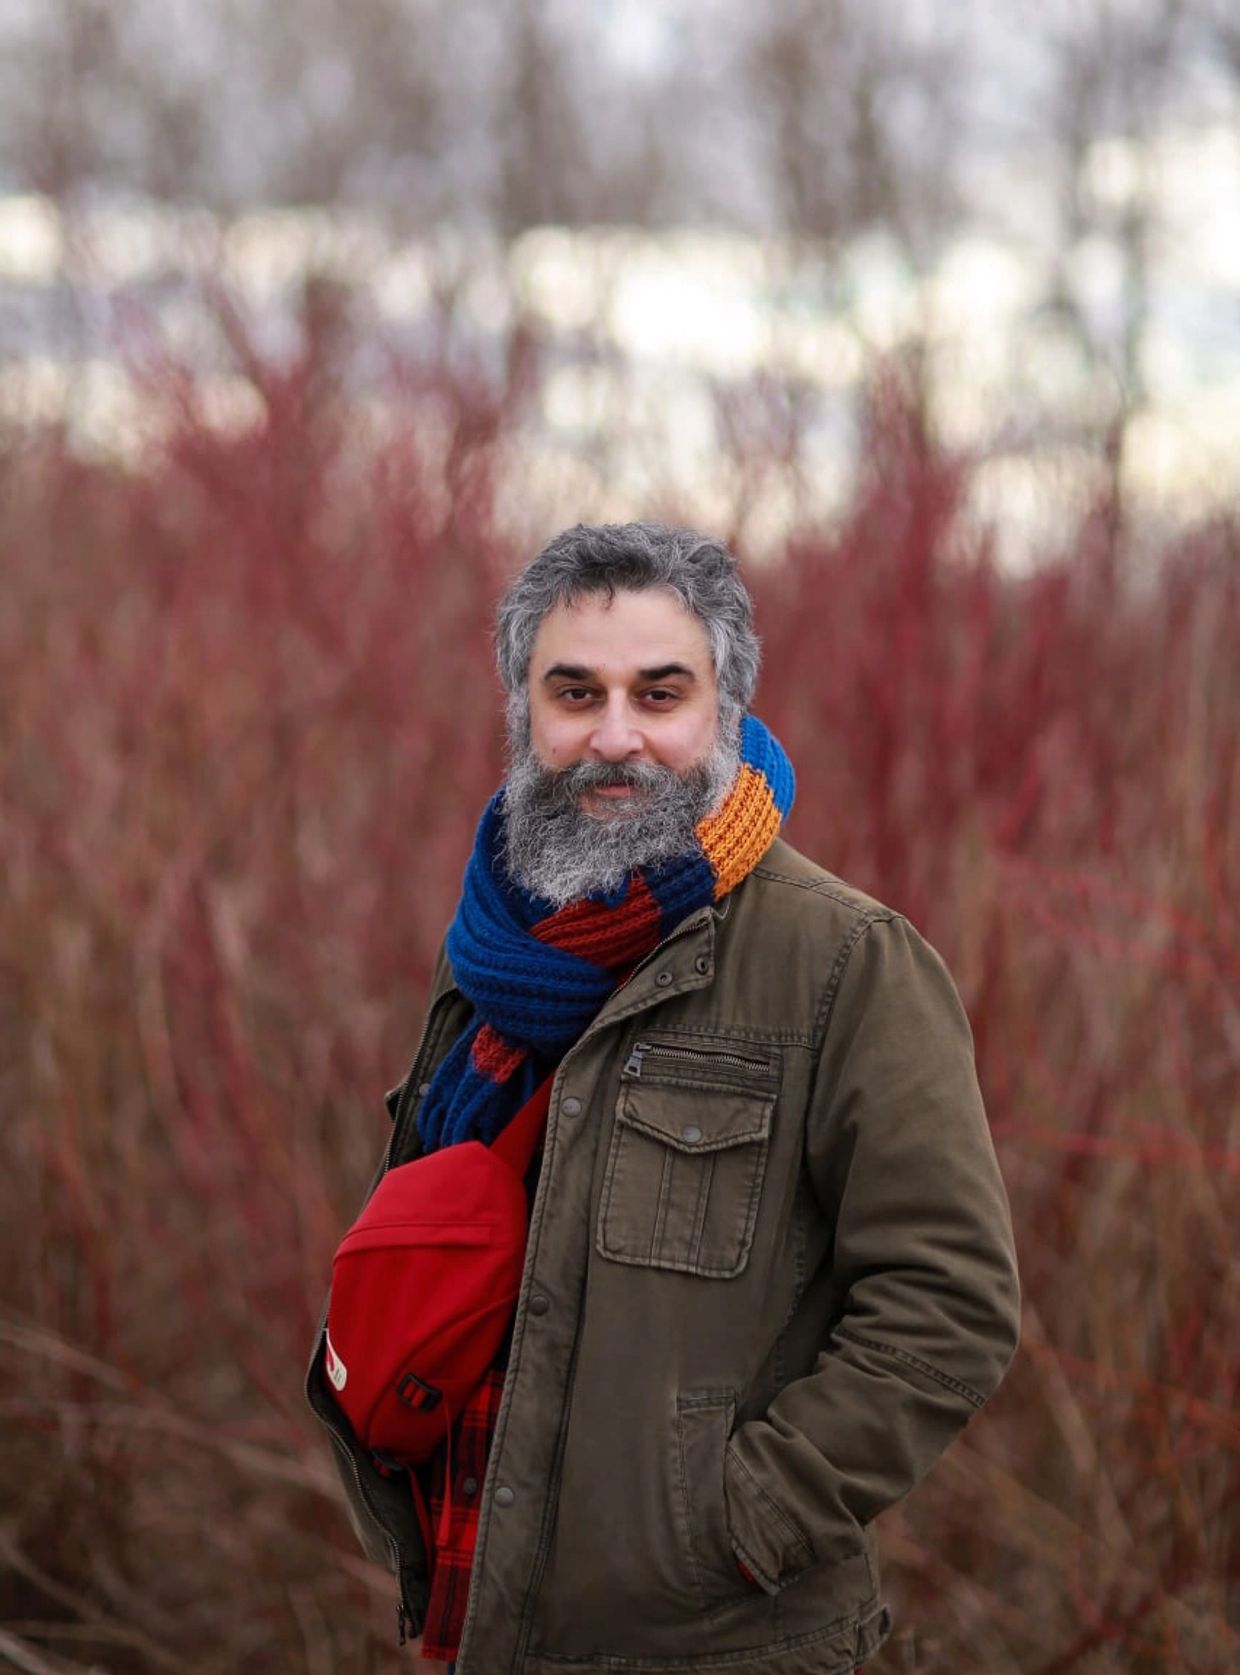 Soroush Dabiri Early wintiner in Tommy Thompson Park. Standing in front of trees. Photo by: Andishe